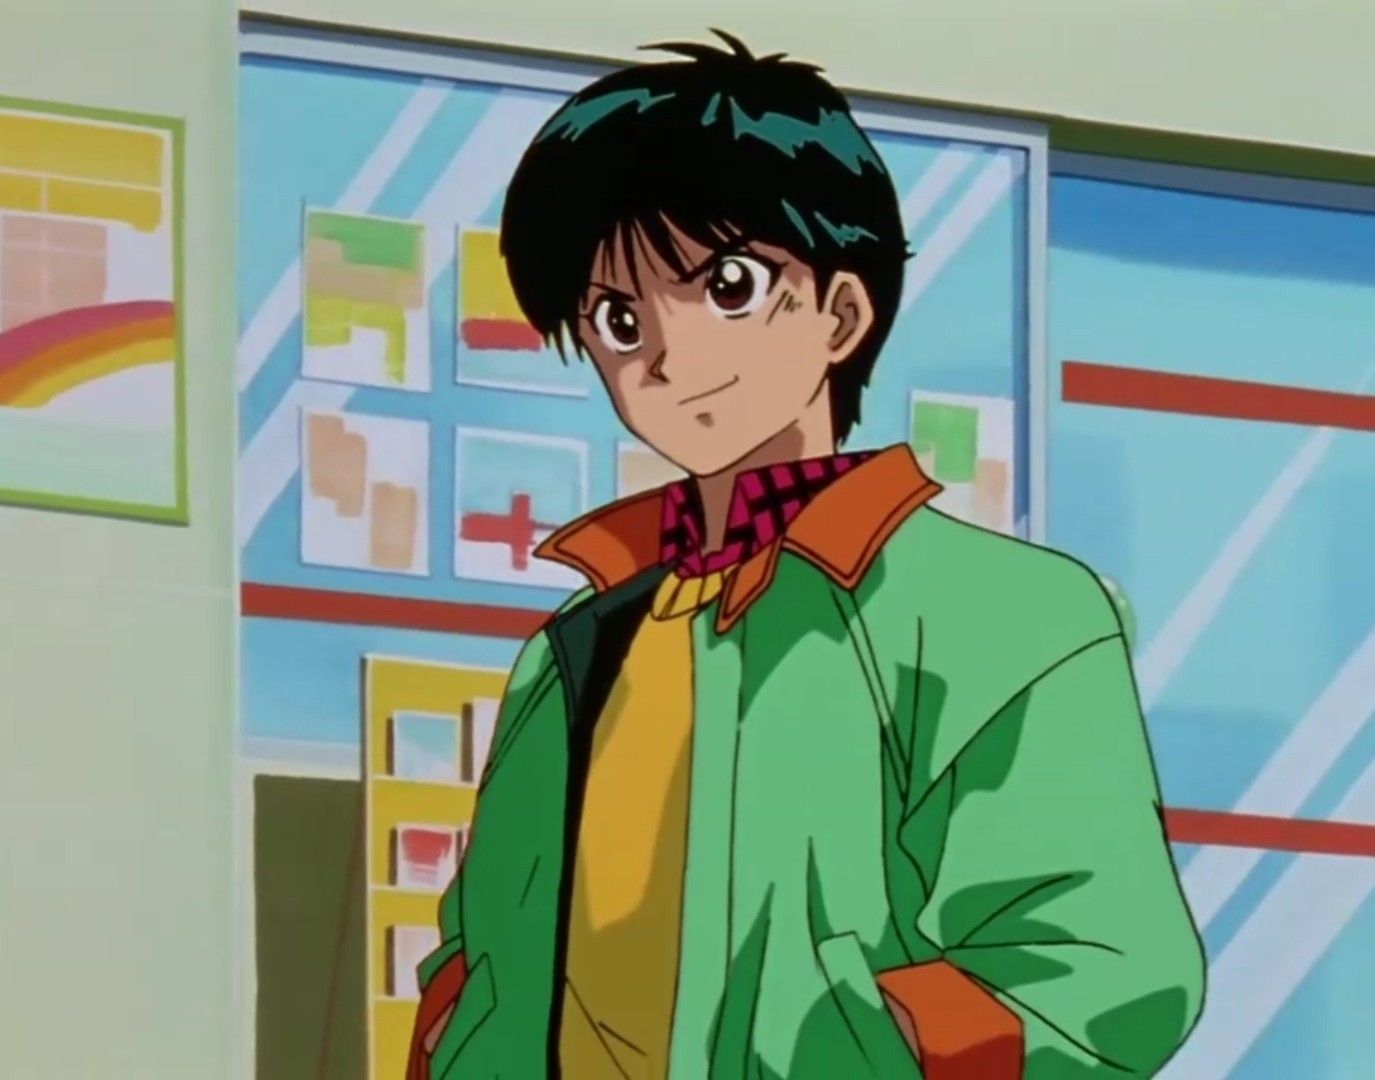 How Well Do You Know Yusuke Urameshi? Take This Quiz to Find Out!